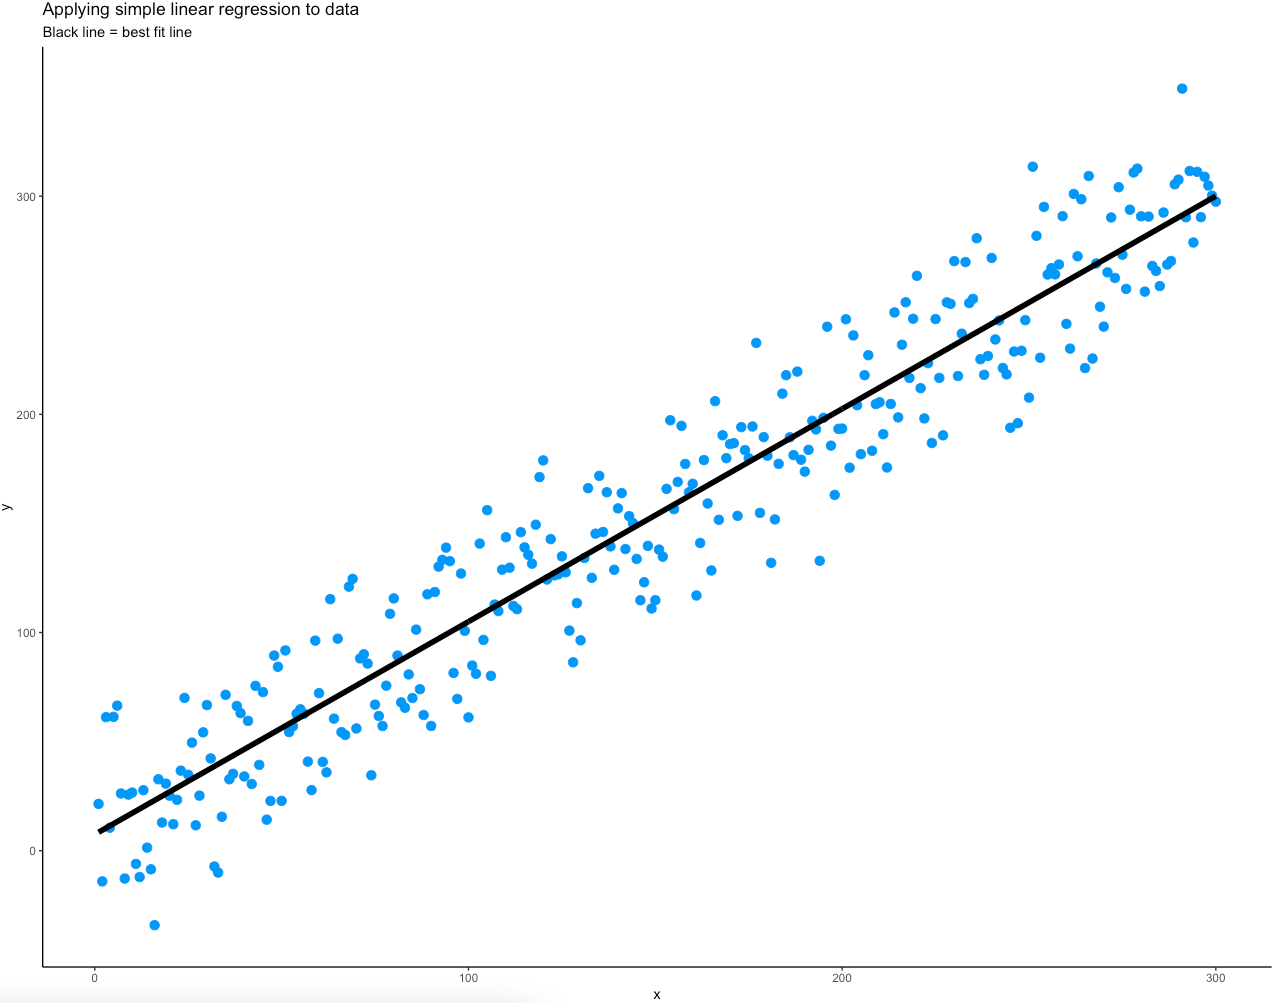 Image 5 - Input data as a scatter plot with predictions (best-fit line)